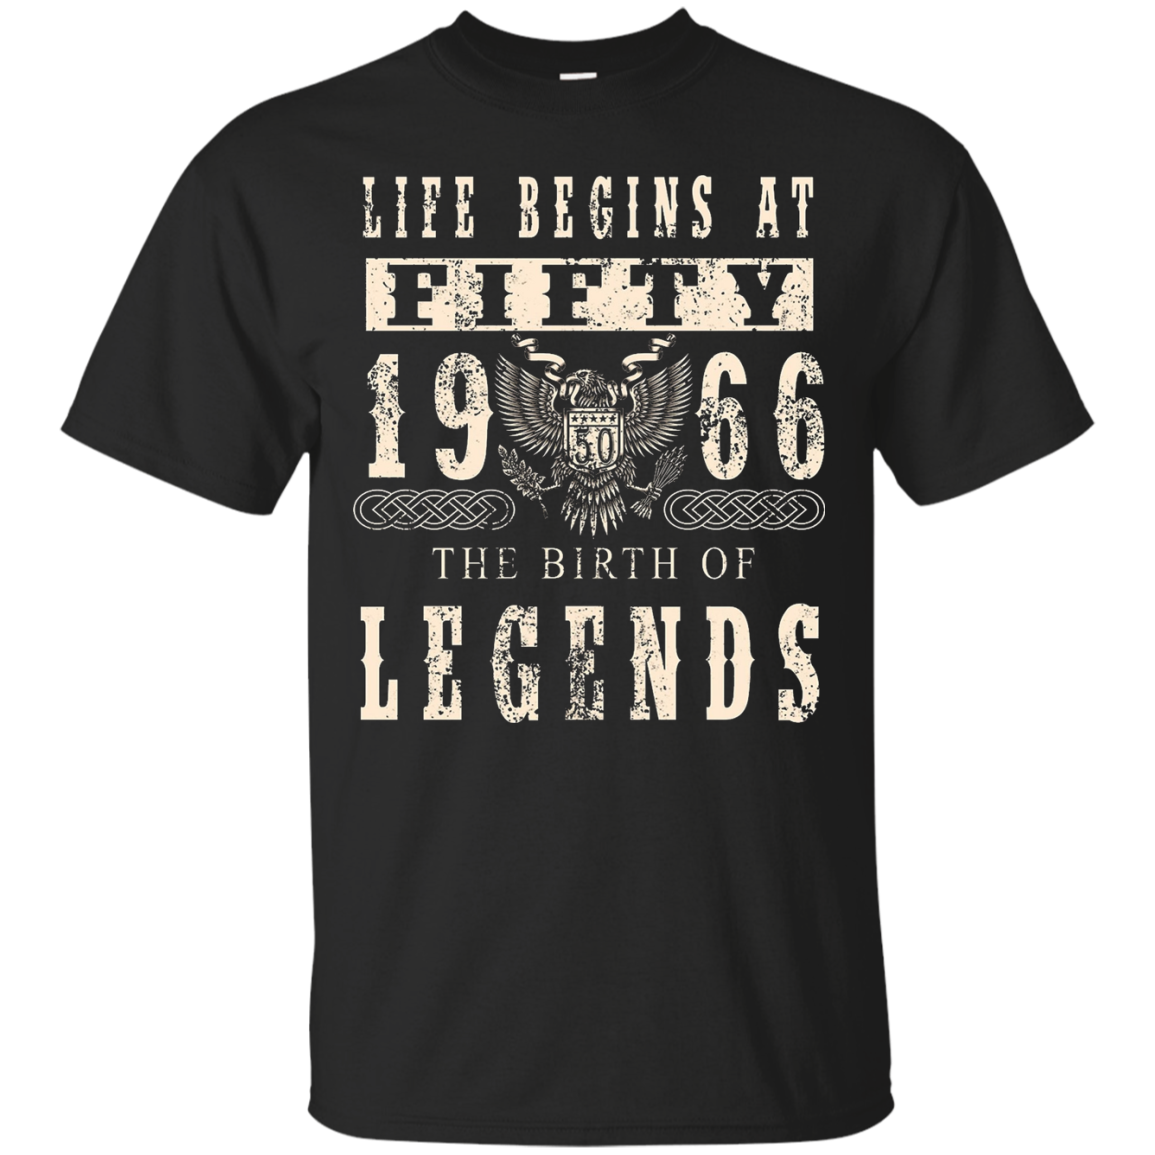 made in 1966 t shirt